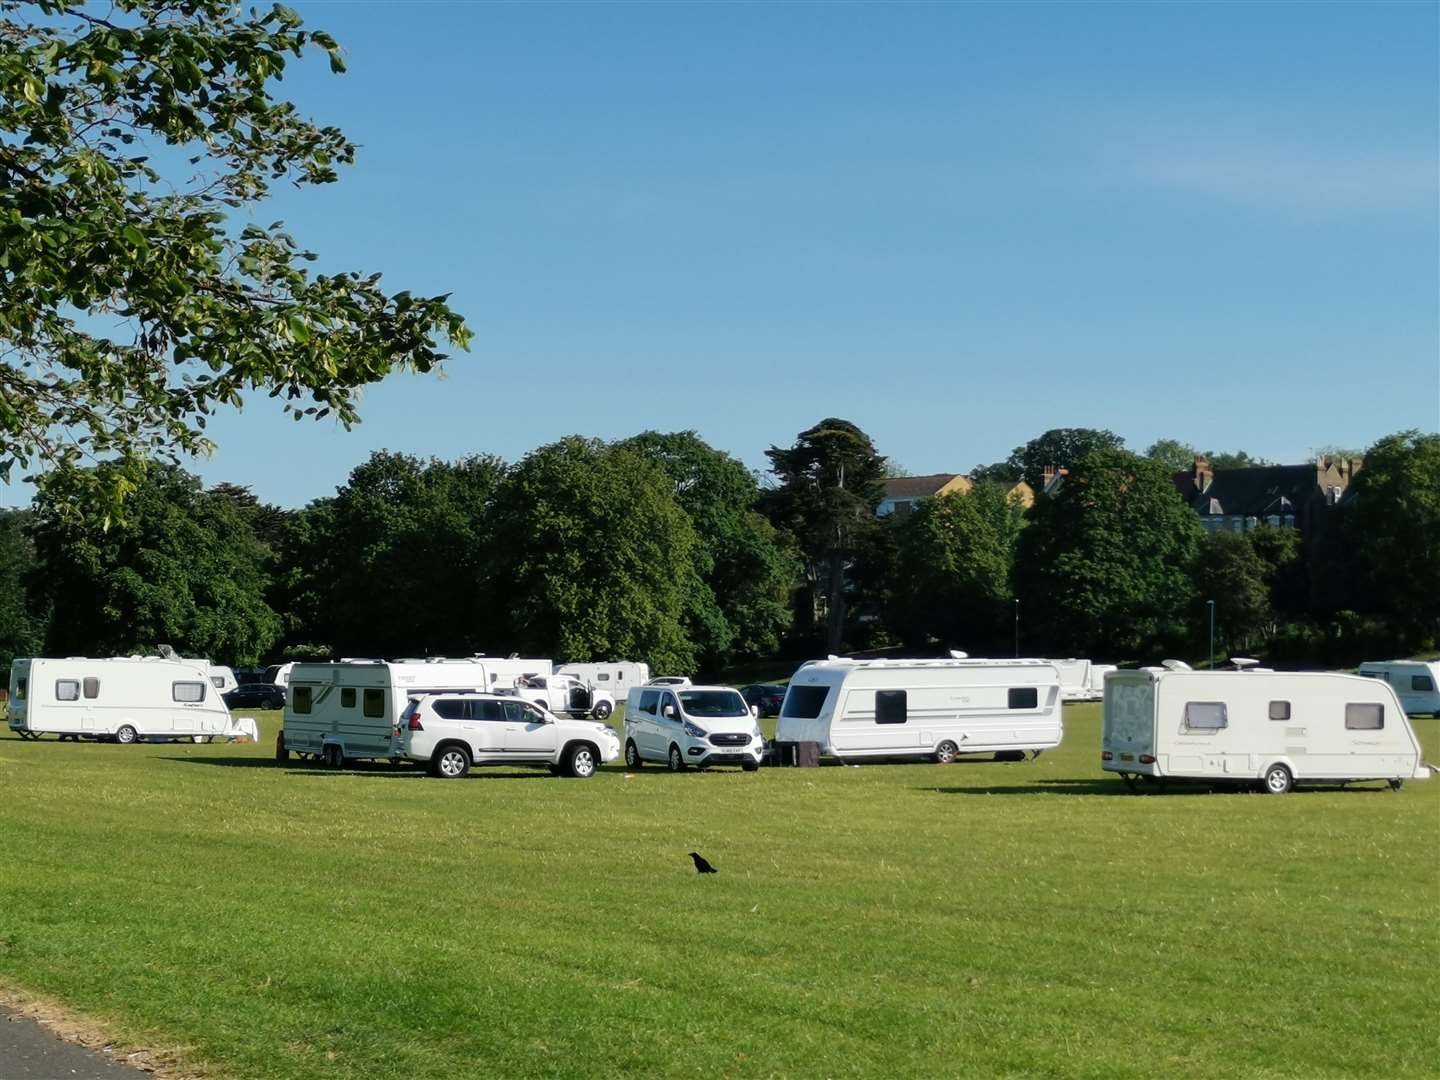 Dane Park in Margate is a regular spot for unauthorised traveller camps